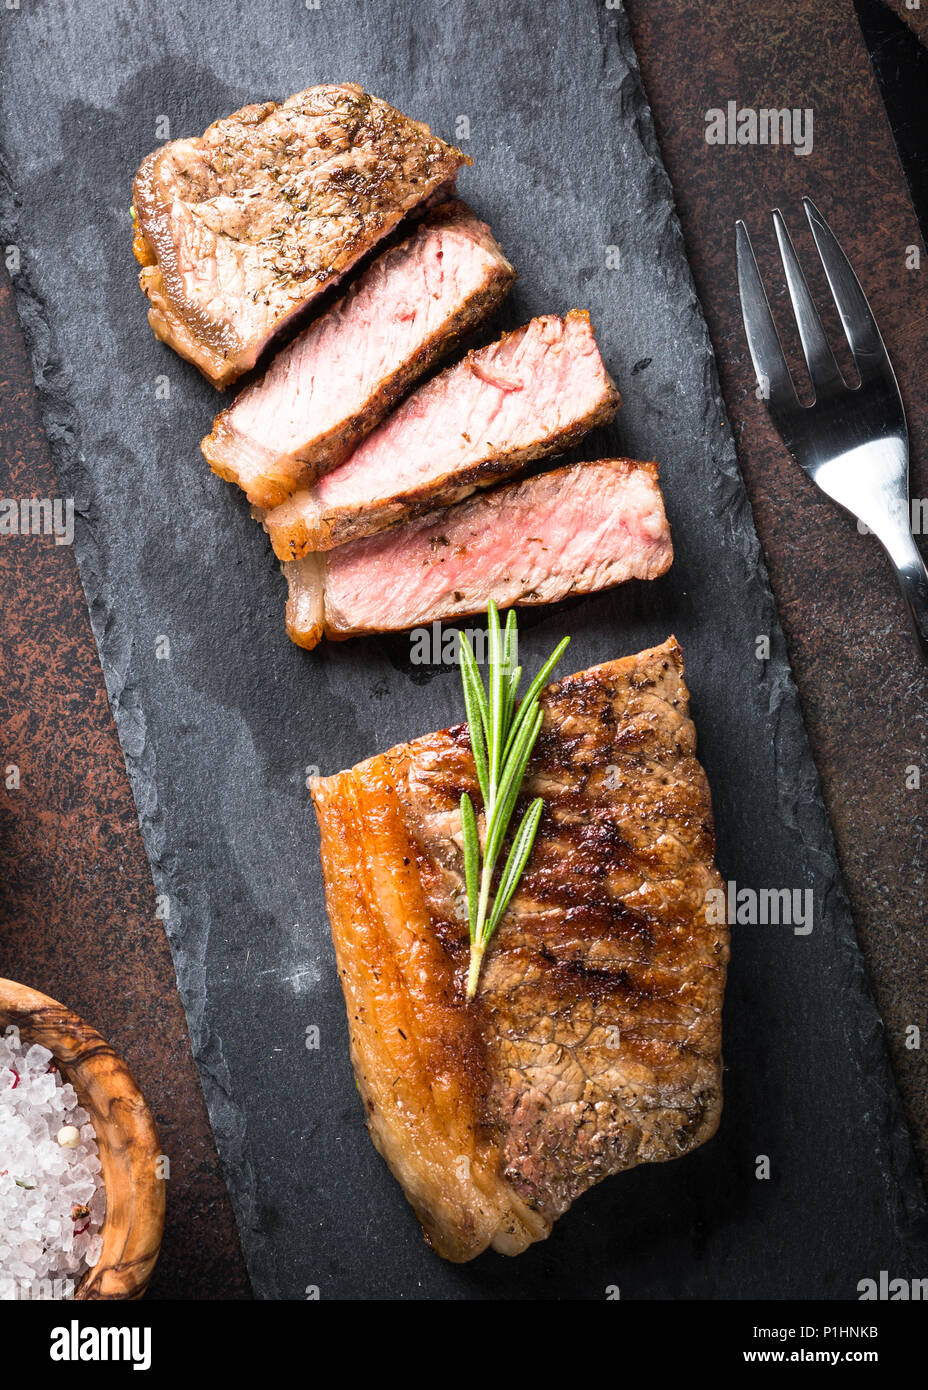 https://c8.alamy.com/comp/P1HNKB/beef-steak-grilled-striploin-steak-on-cutting-board-with-rosemary-top-view-P1HNKB.jpg